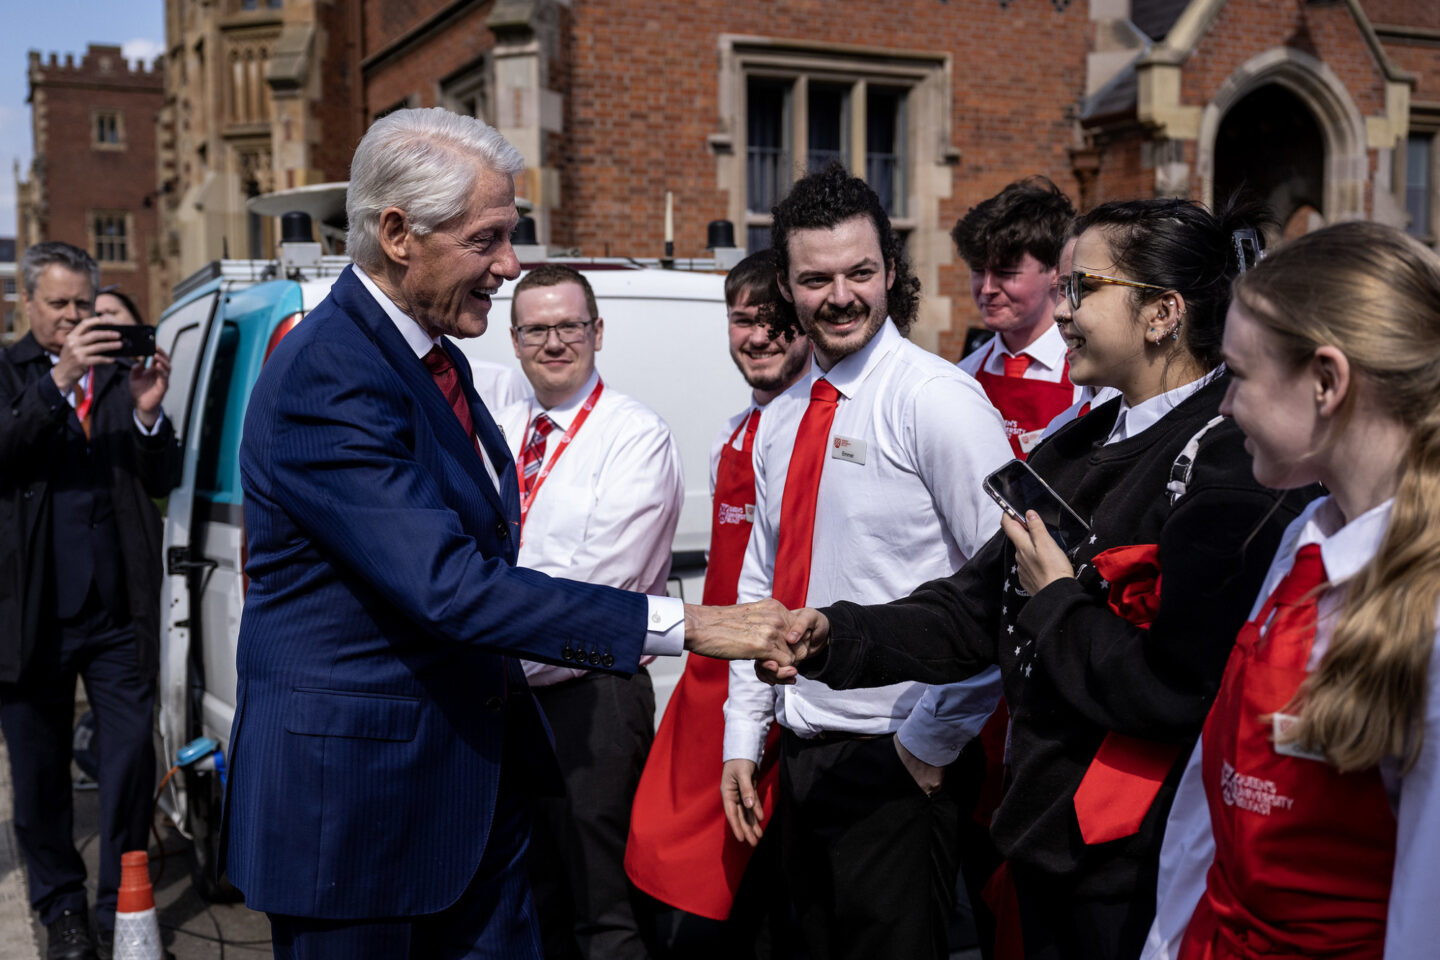 President Clinton shakes hands of students gathered outside